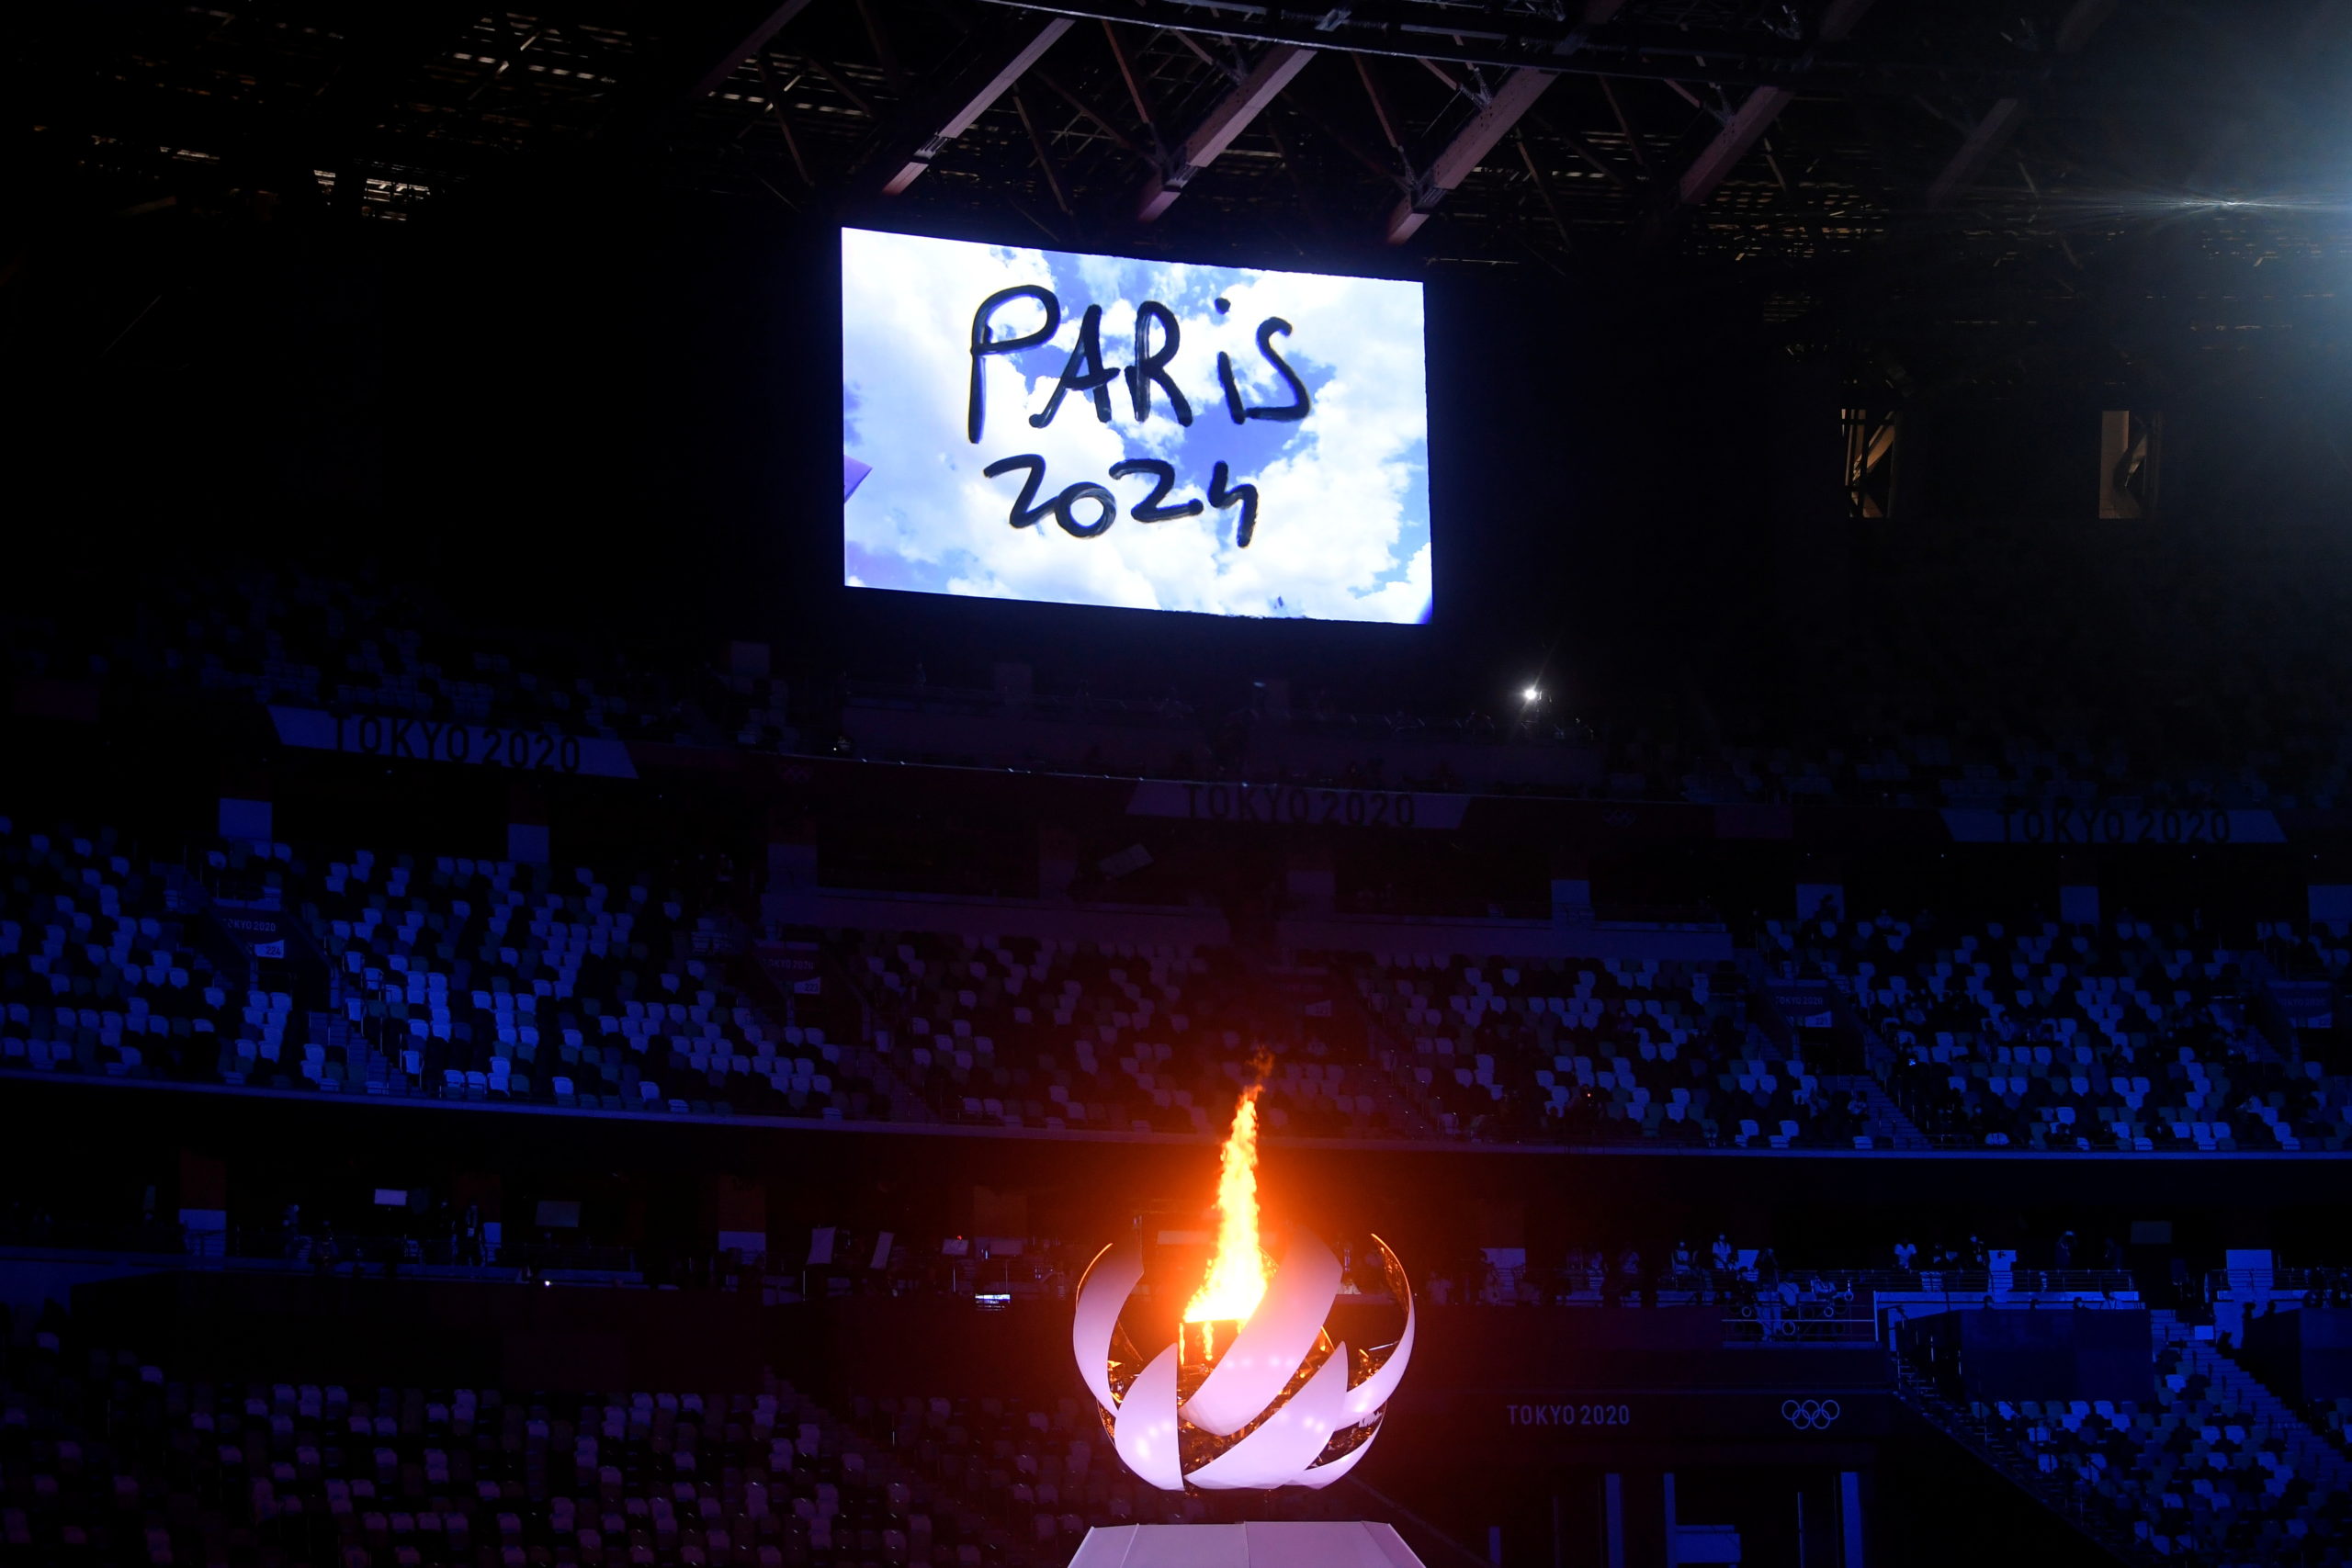 The Olympic torch seen lit for the last time as Paris takes over the next hosting.